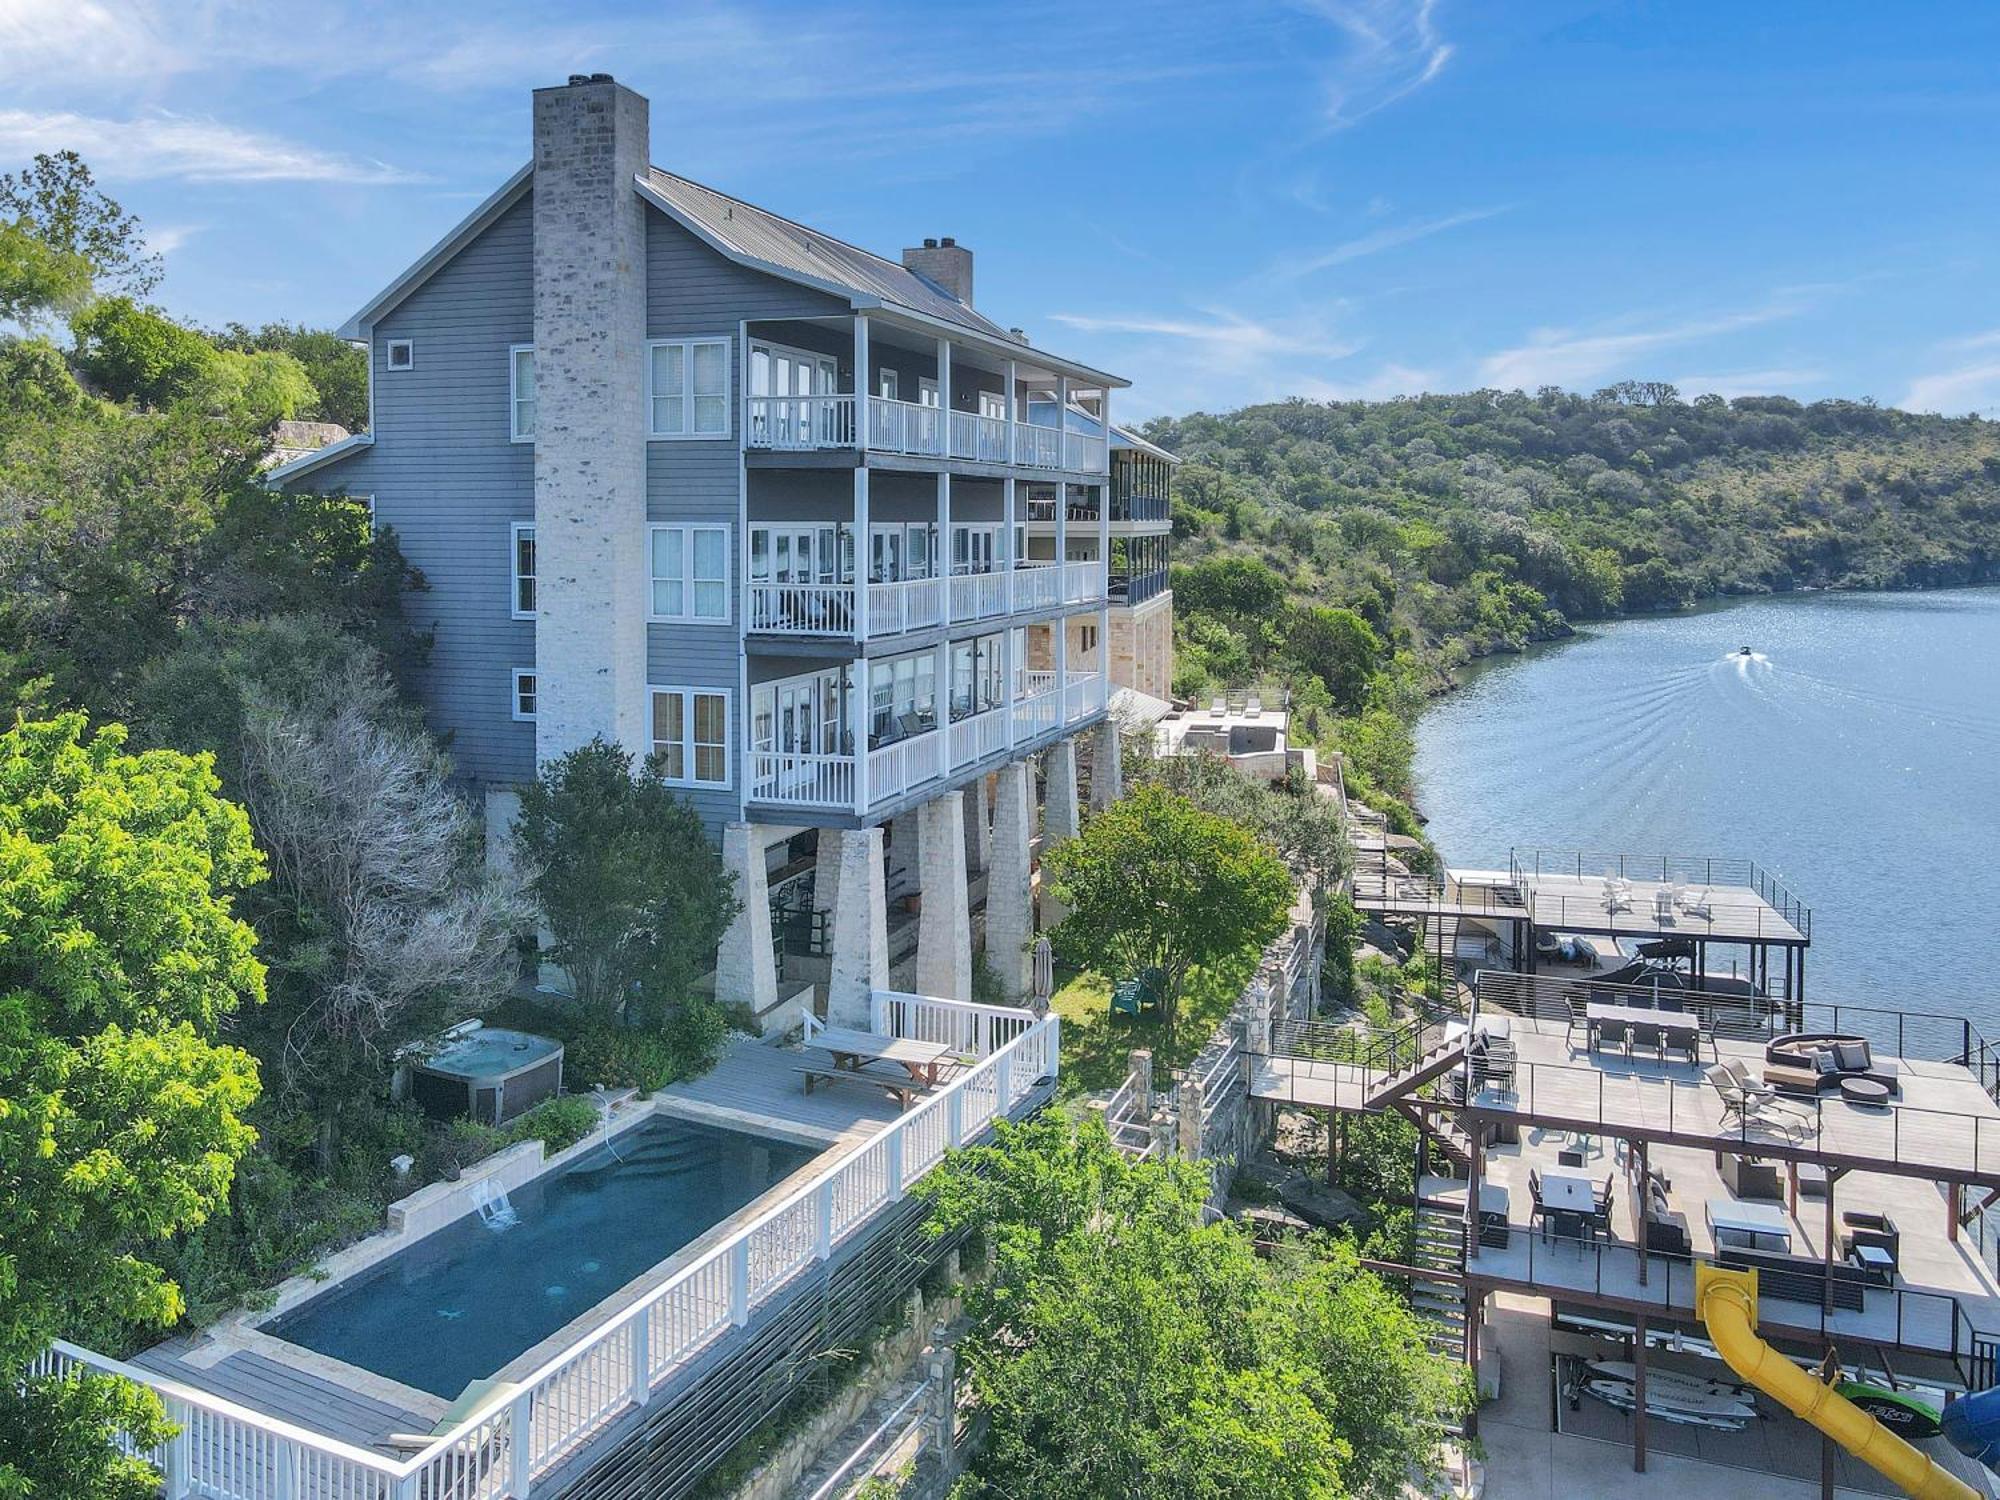 Luxury Lake Marble Falls House With Swimming Pool Hot Tub And Private Boat Slip 外观 照片